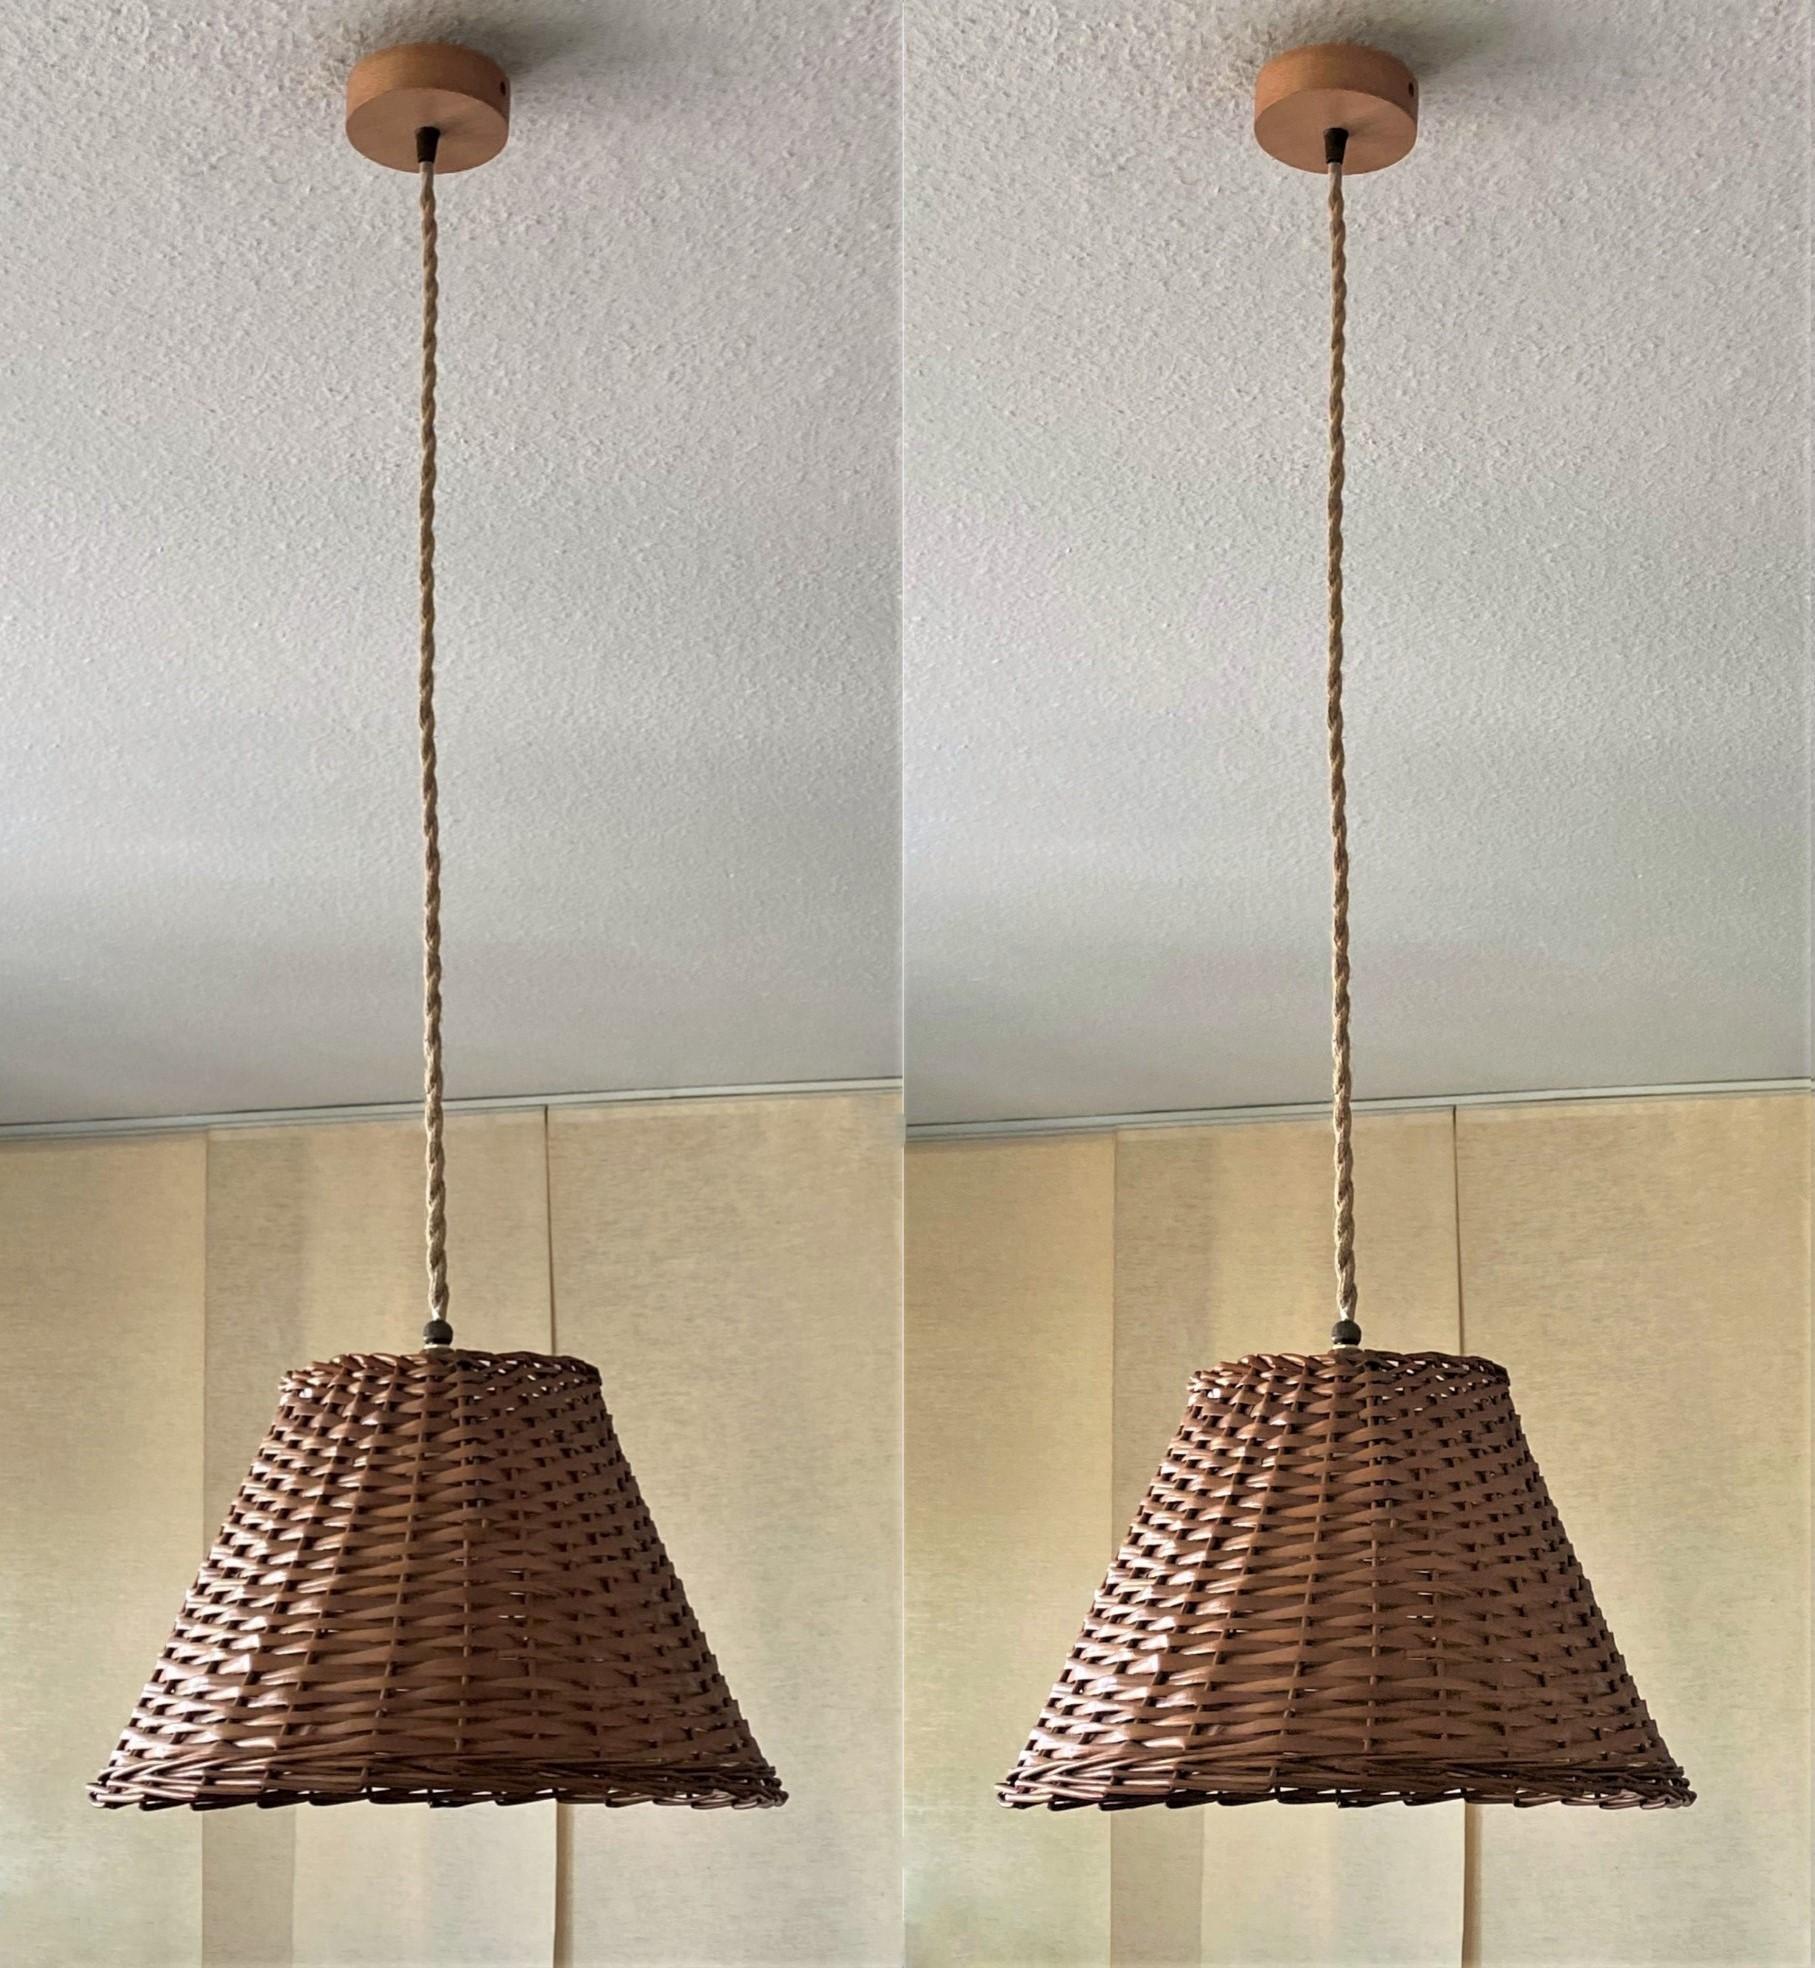 Pair of midcentury rattan pendants, Denmark, 1960s. These beautiful suspension lamps are handcrafted in rattan, lamp shade design with wood canopy. Each pendant with single brass bulb holder for a large sized E27 crew bulb, provinding a warm and